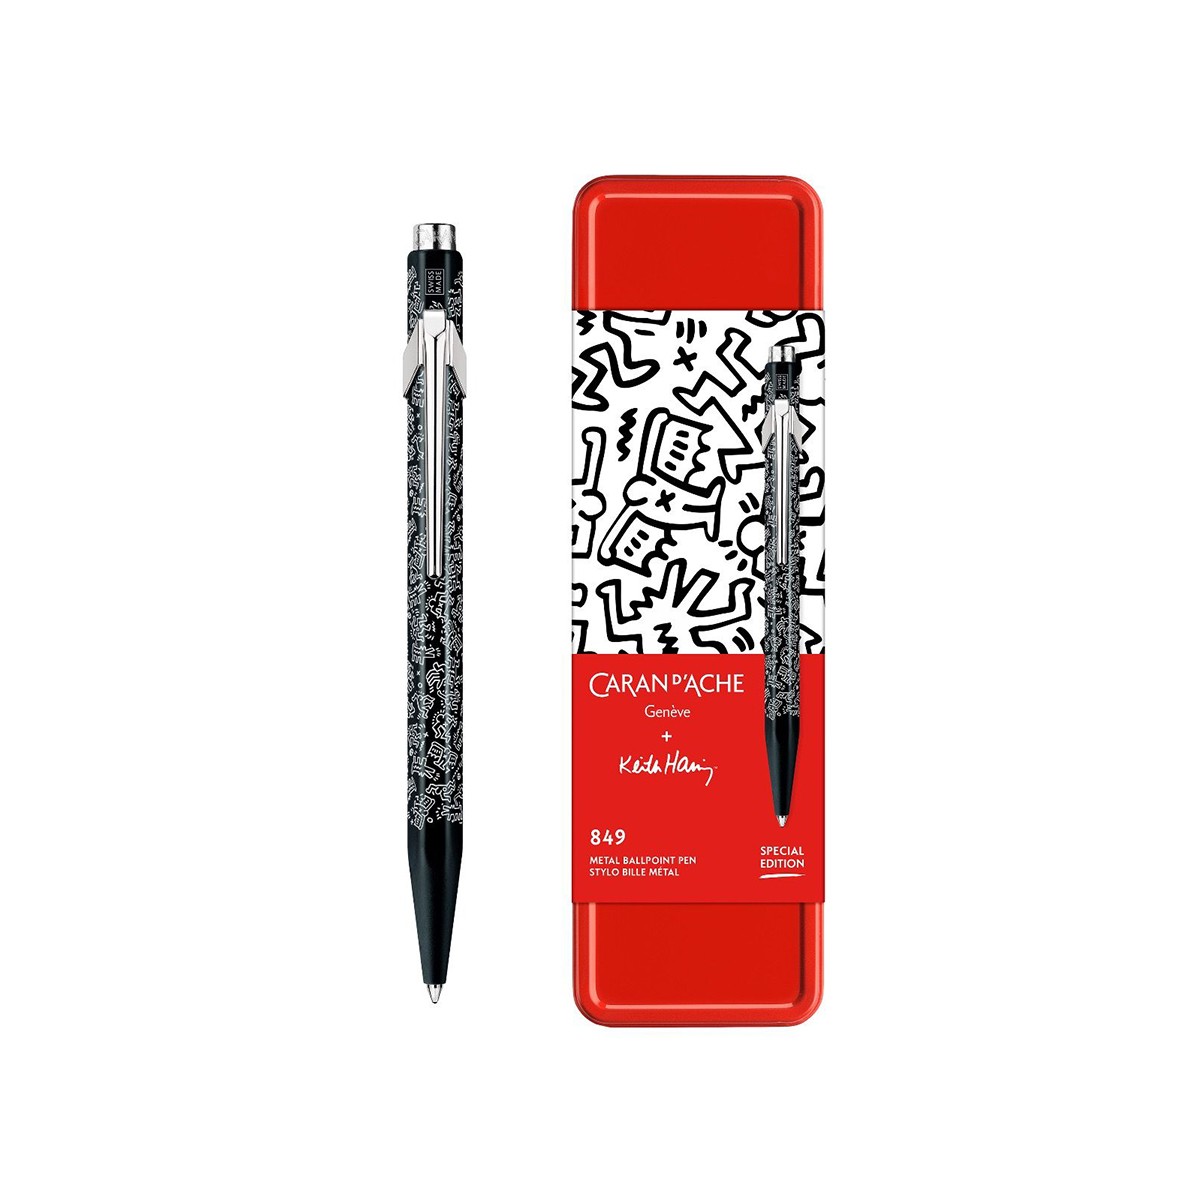 CARAN D'ACHE x Keith Haring Στυλό Διαρκείας 849 Μαύρο - Special Edition